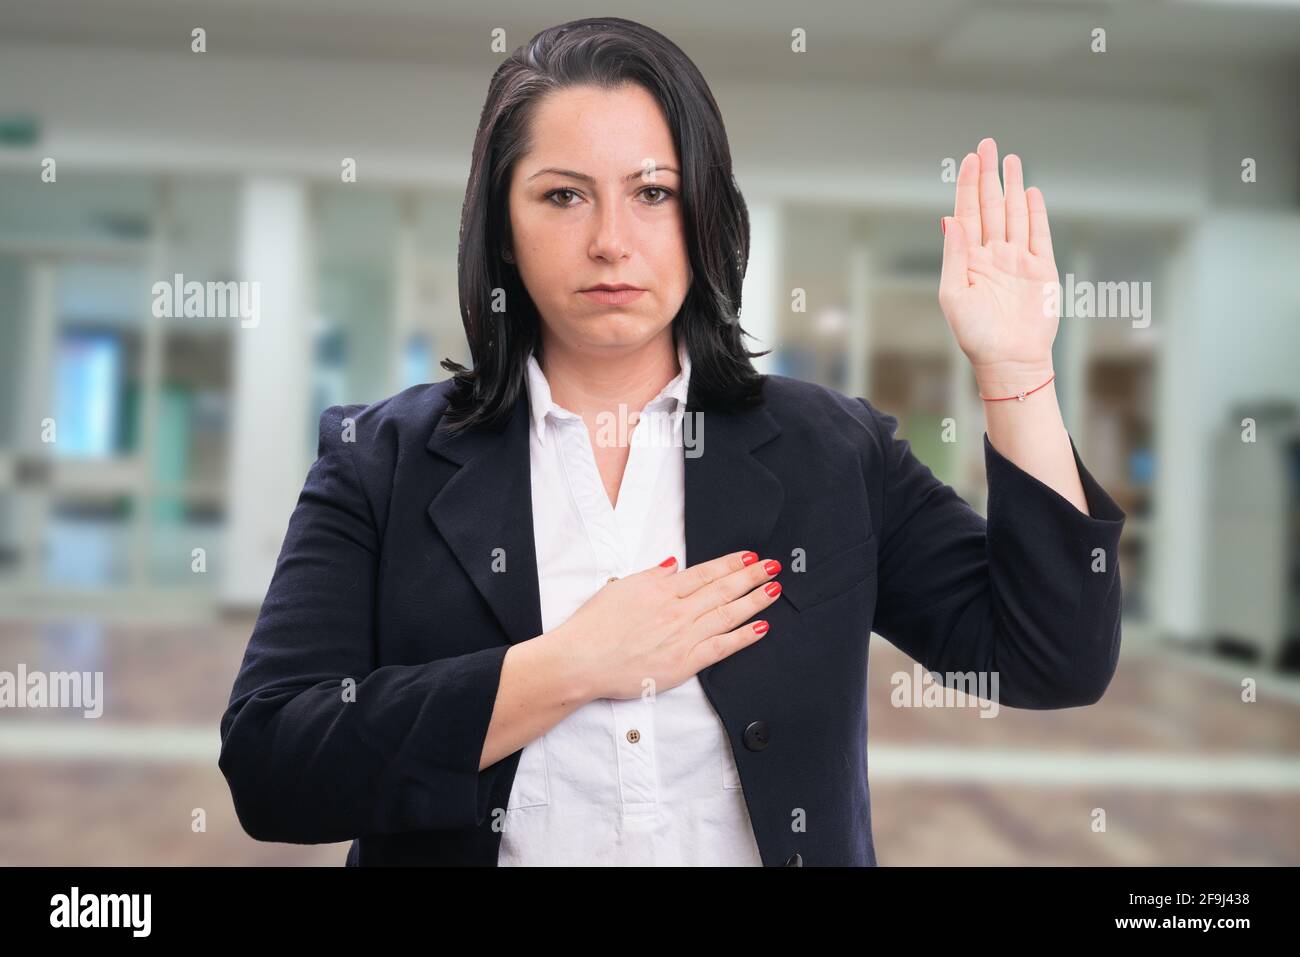 Serious female entrepreneur businesswoman making honest oath gesture showing palm touching chest heart with office room background Stock Photo